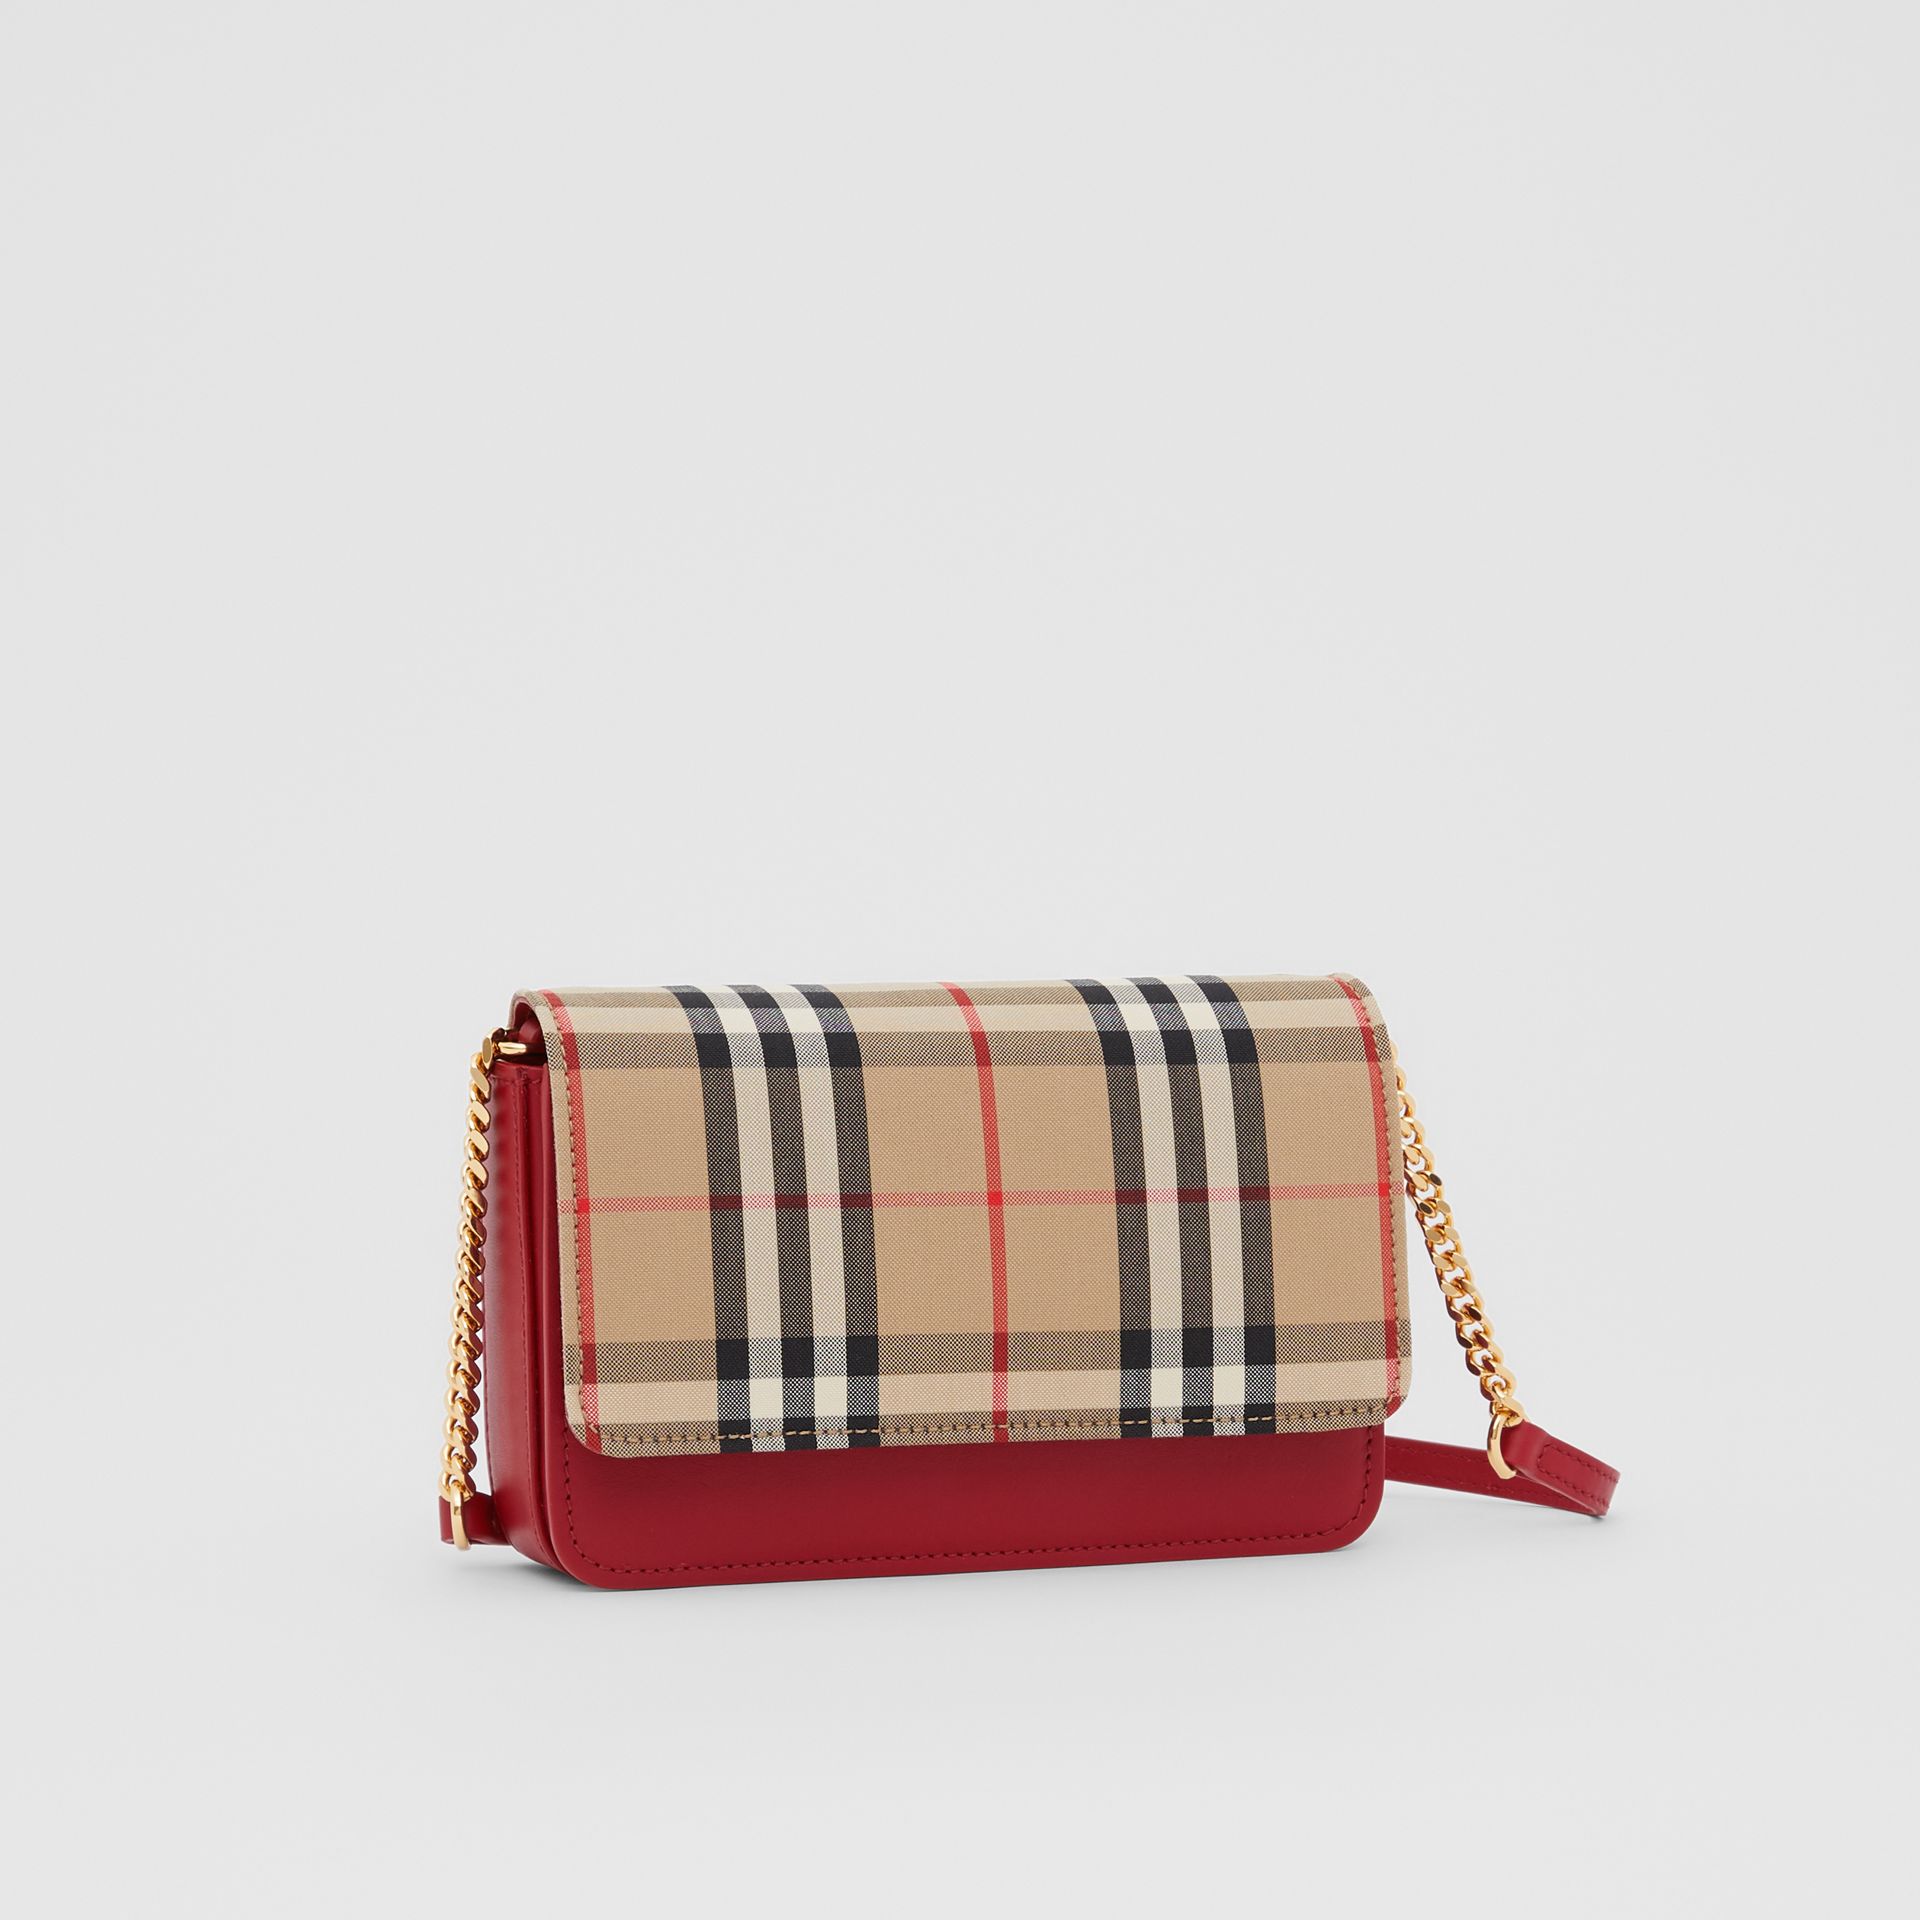 What are the differences between Burberry and Gucci handbags? Which one do  you prefer and why? - Quora